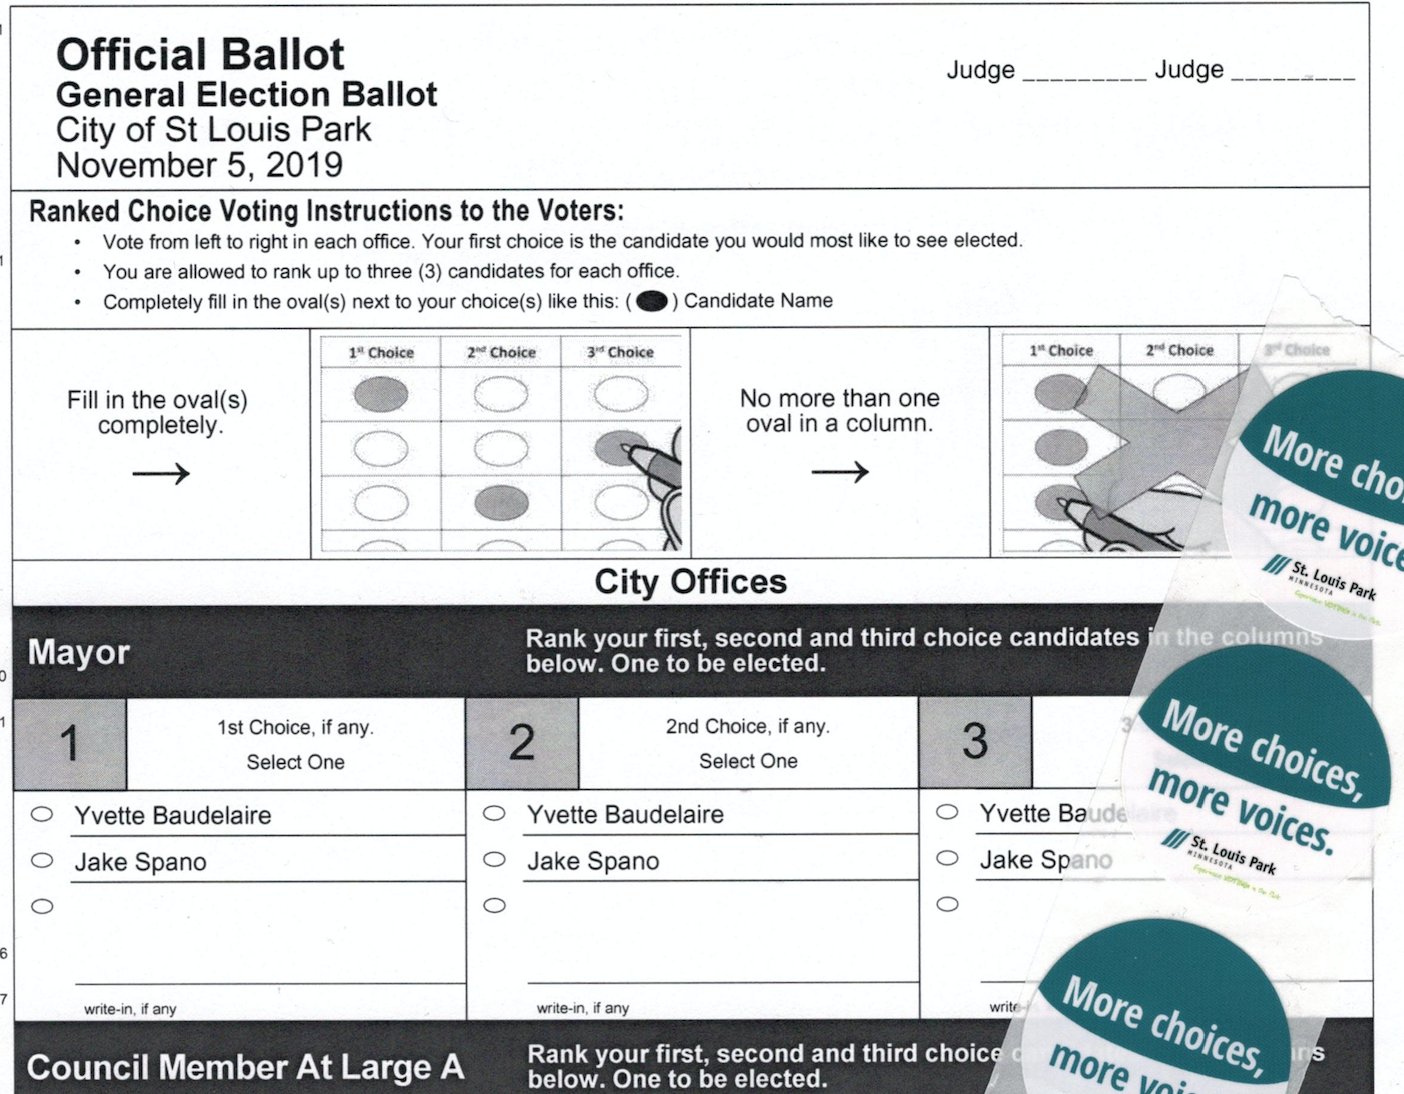 Ballot with an RCV race and stickers that stay more choices more voices